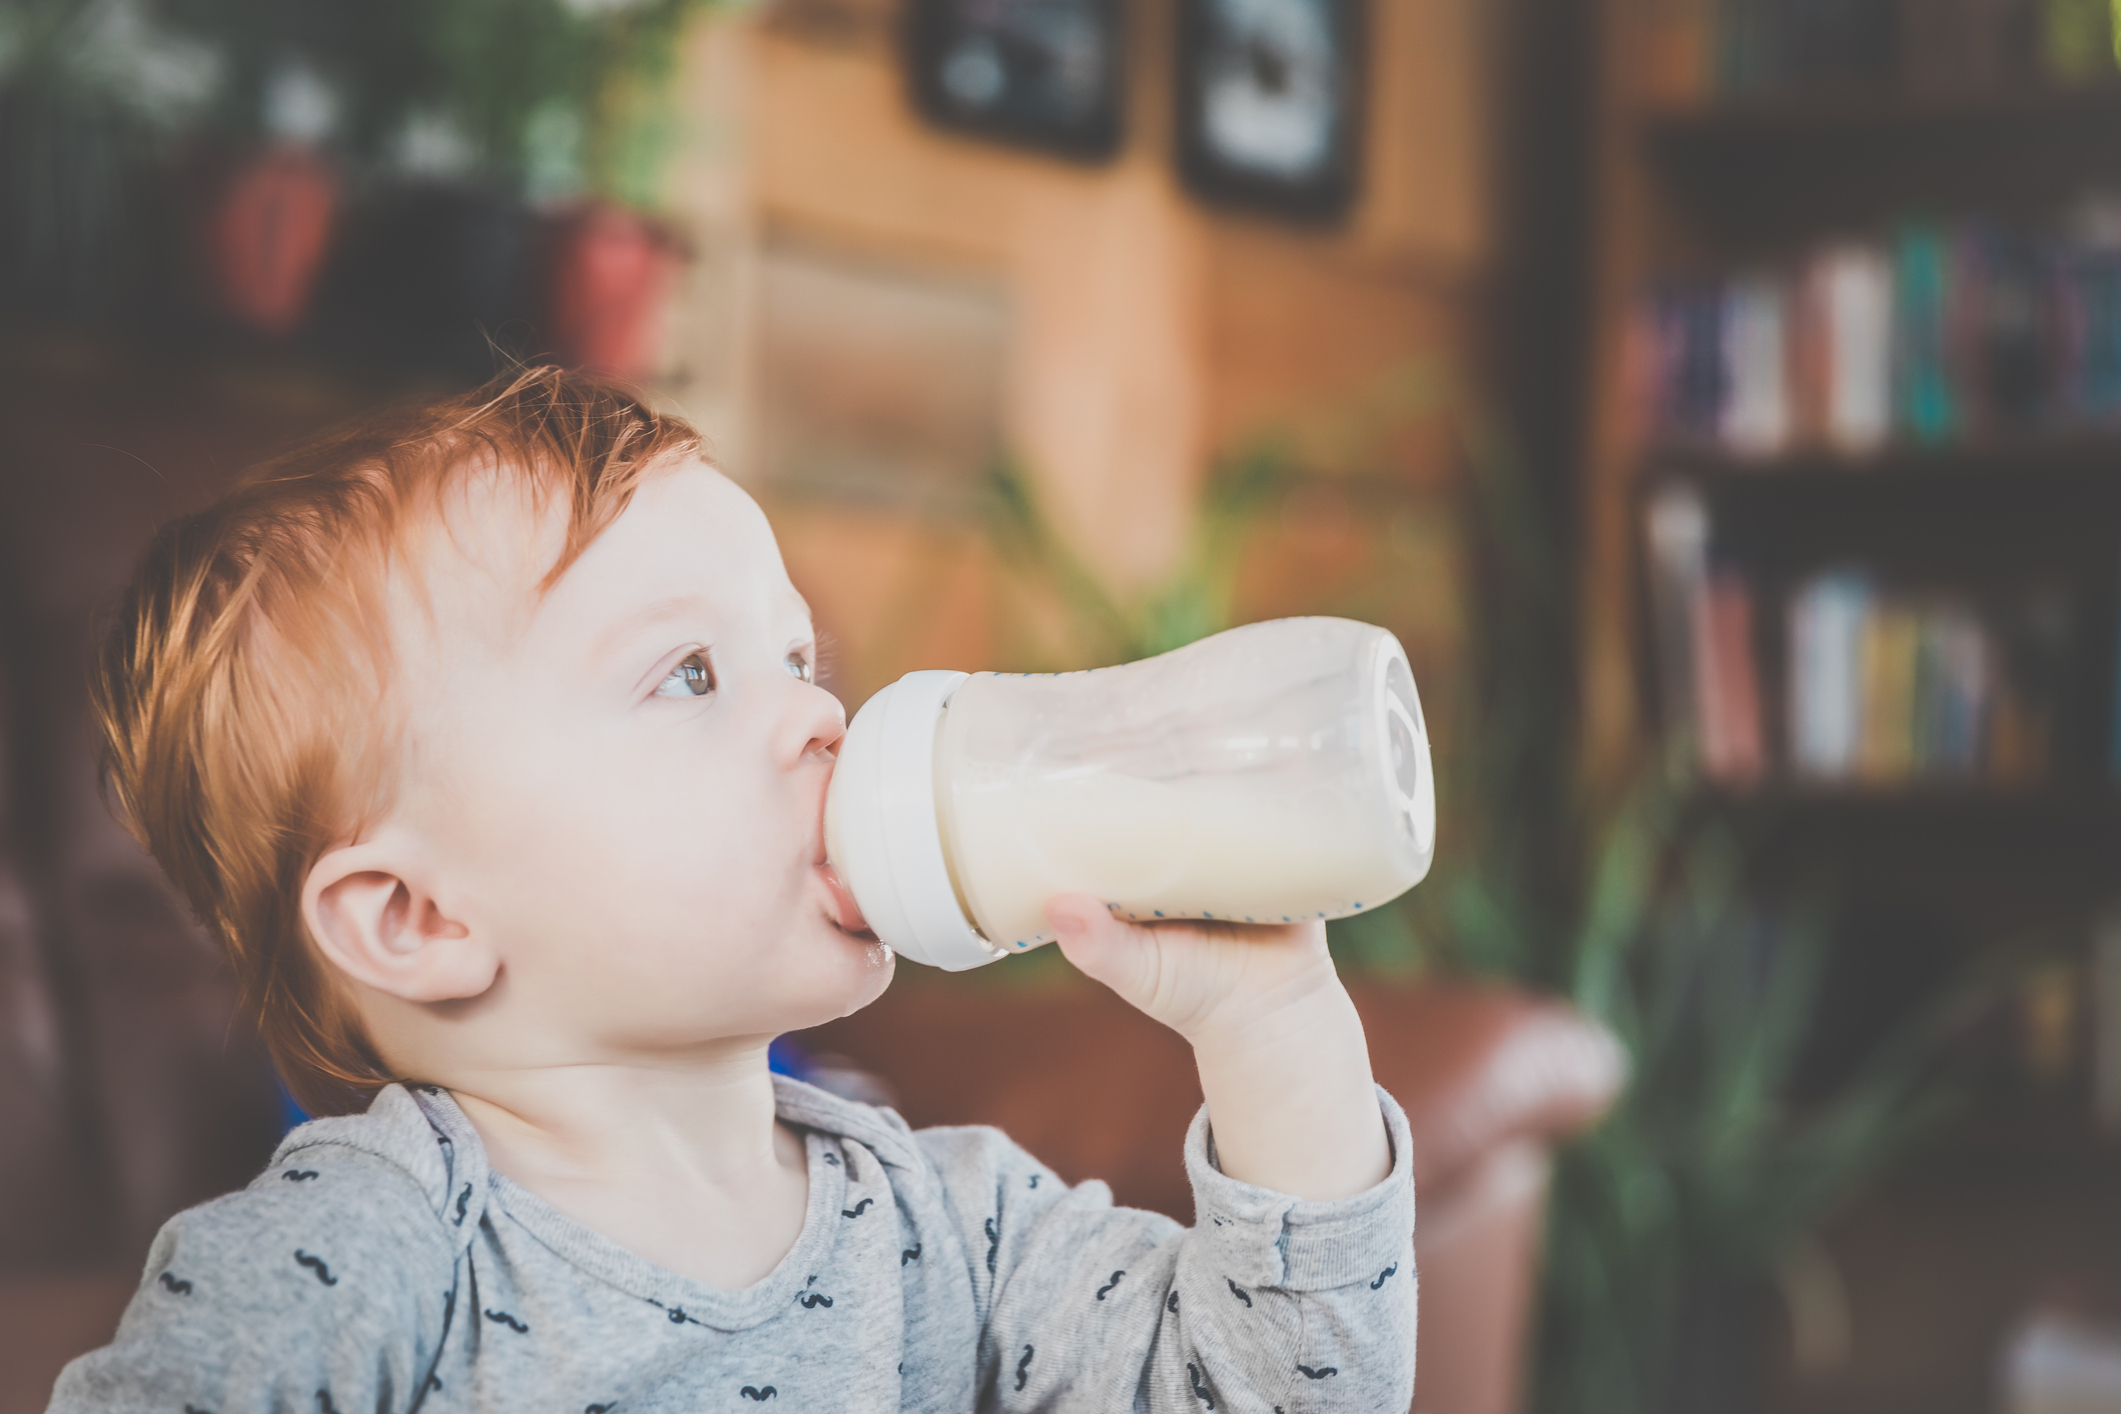 Toddler drinking from a bottle